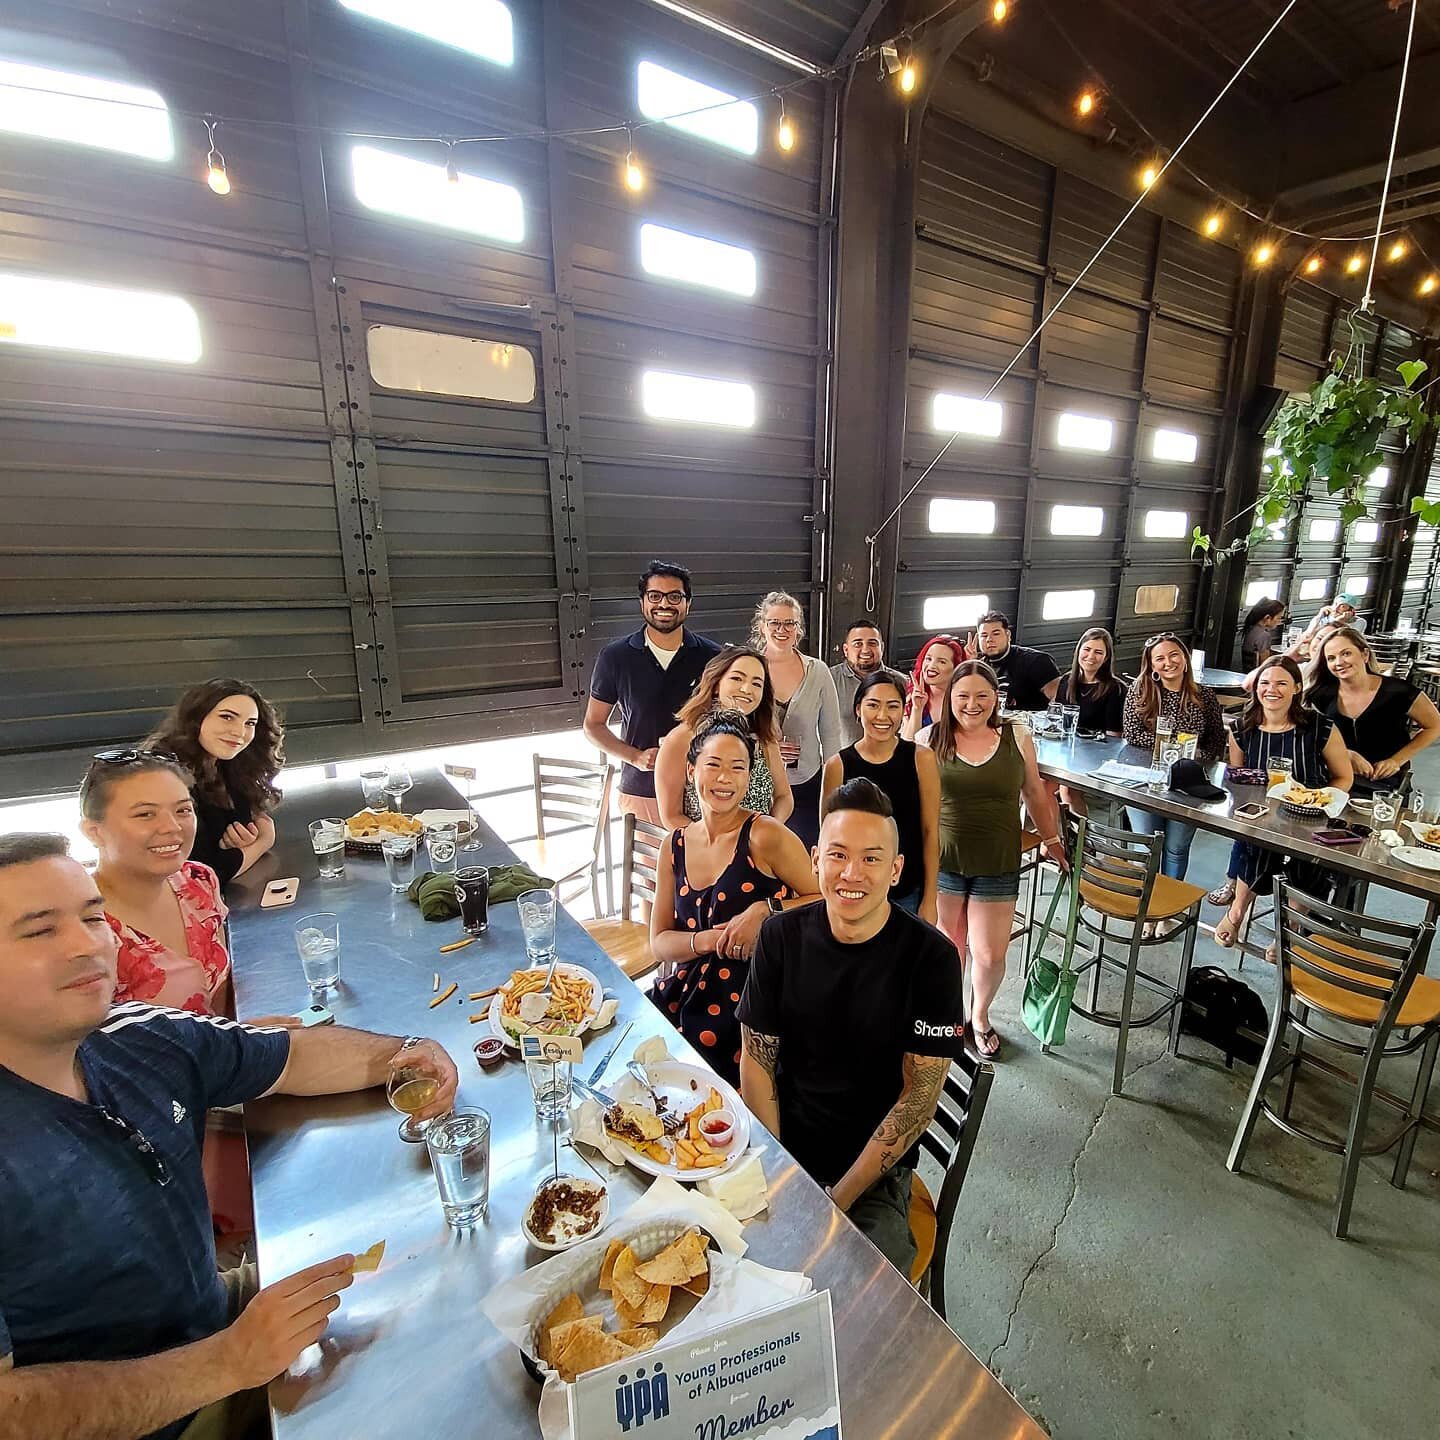 New member happy hours are in full swing 🍻😃

Thank you to @riobravobrewing for hosting and providing the best beer in Albuquerque 🙌🍺

Click the link in our bio to learn more about YPA, our upcoming events, and how to become a member! ▶️▶️👀

#ypa